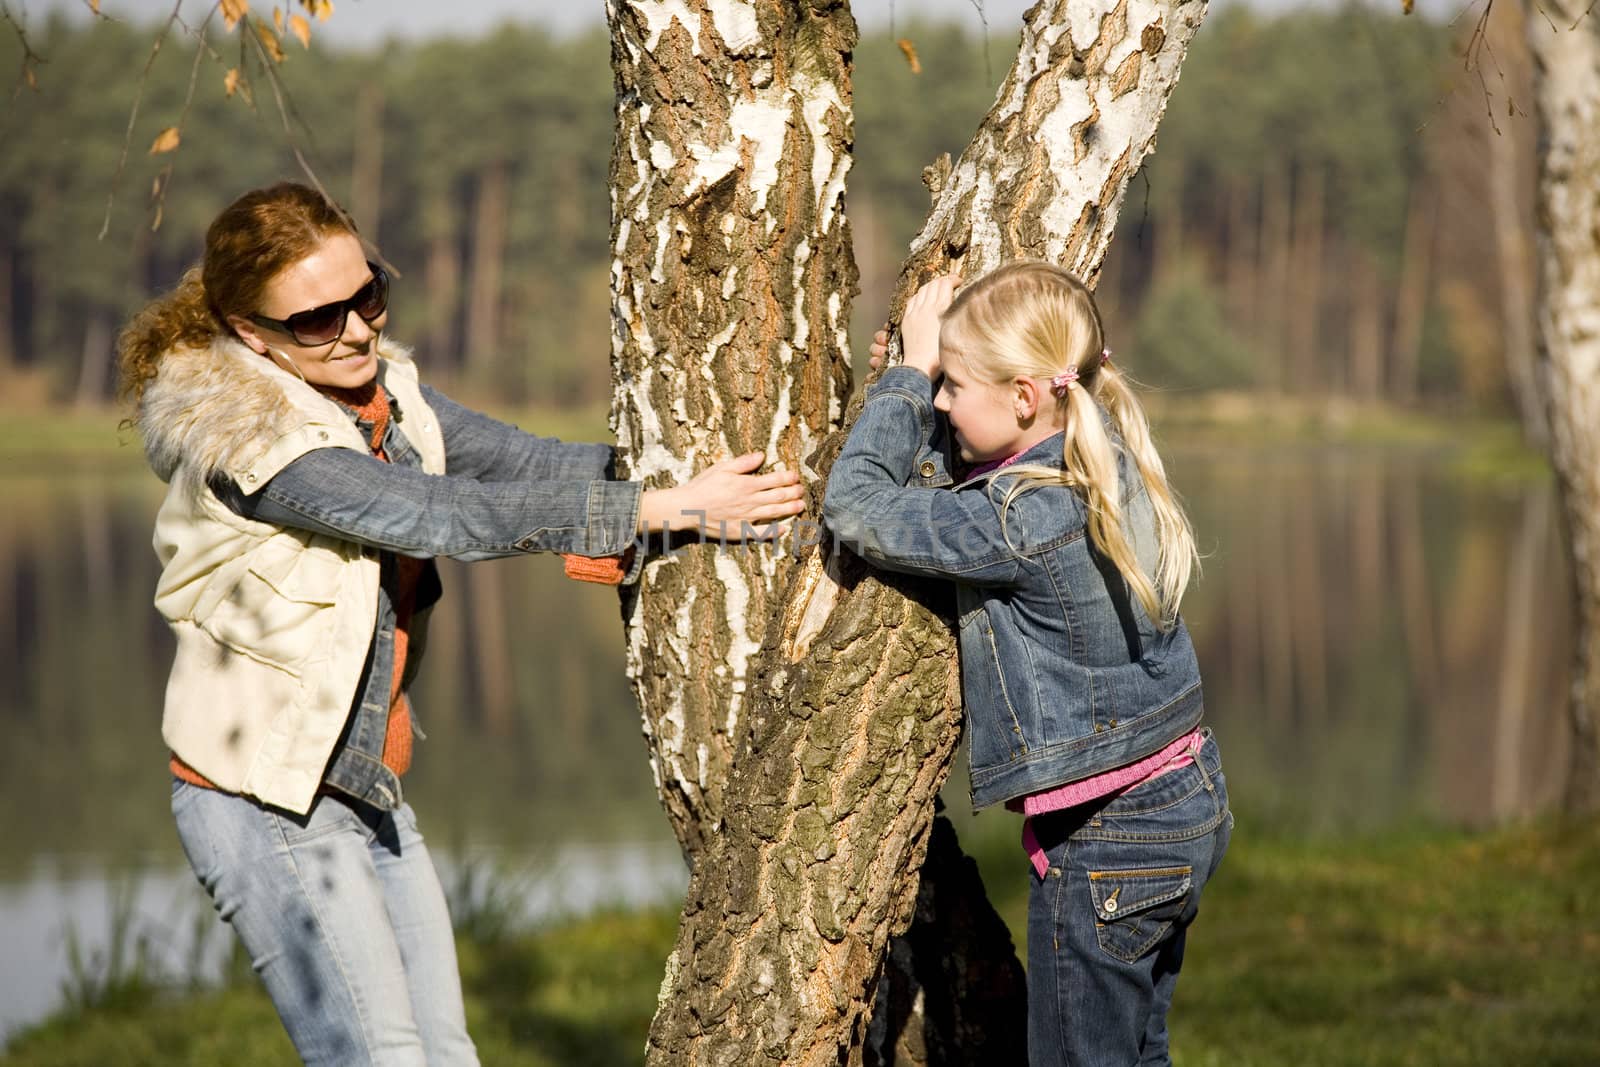 Littlt girl with mother at the lake in the forest, is a warm, sunny autumn day.